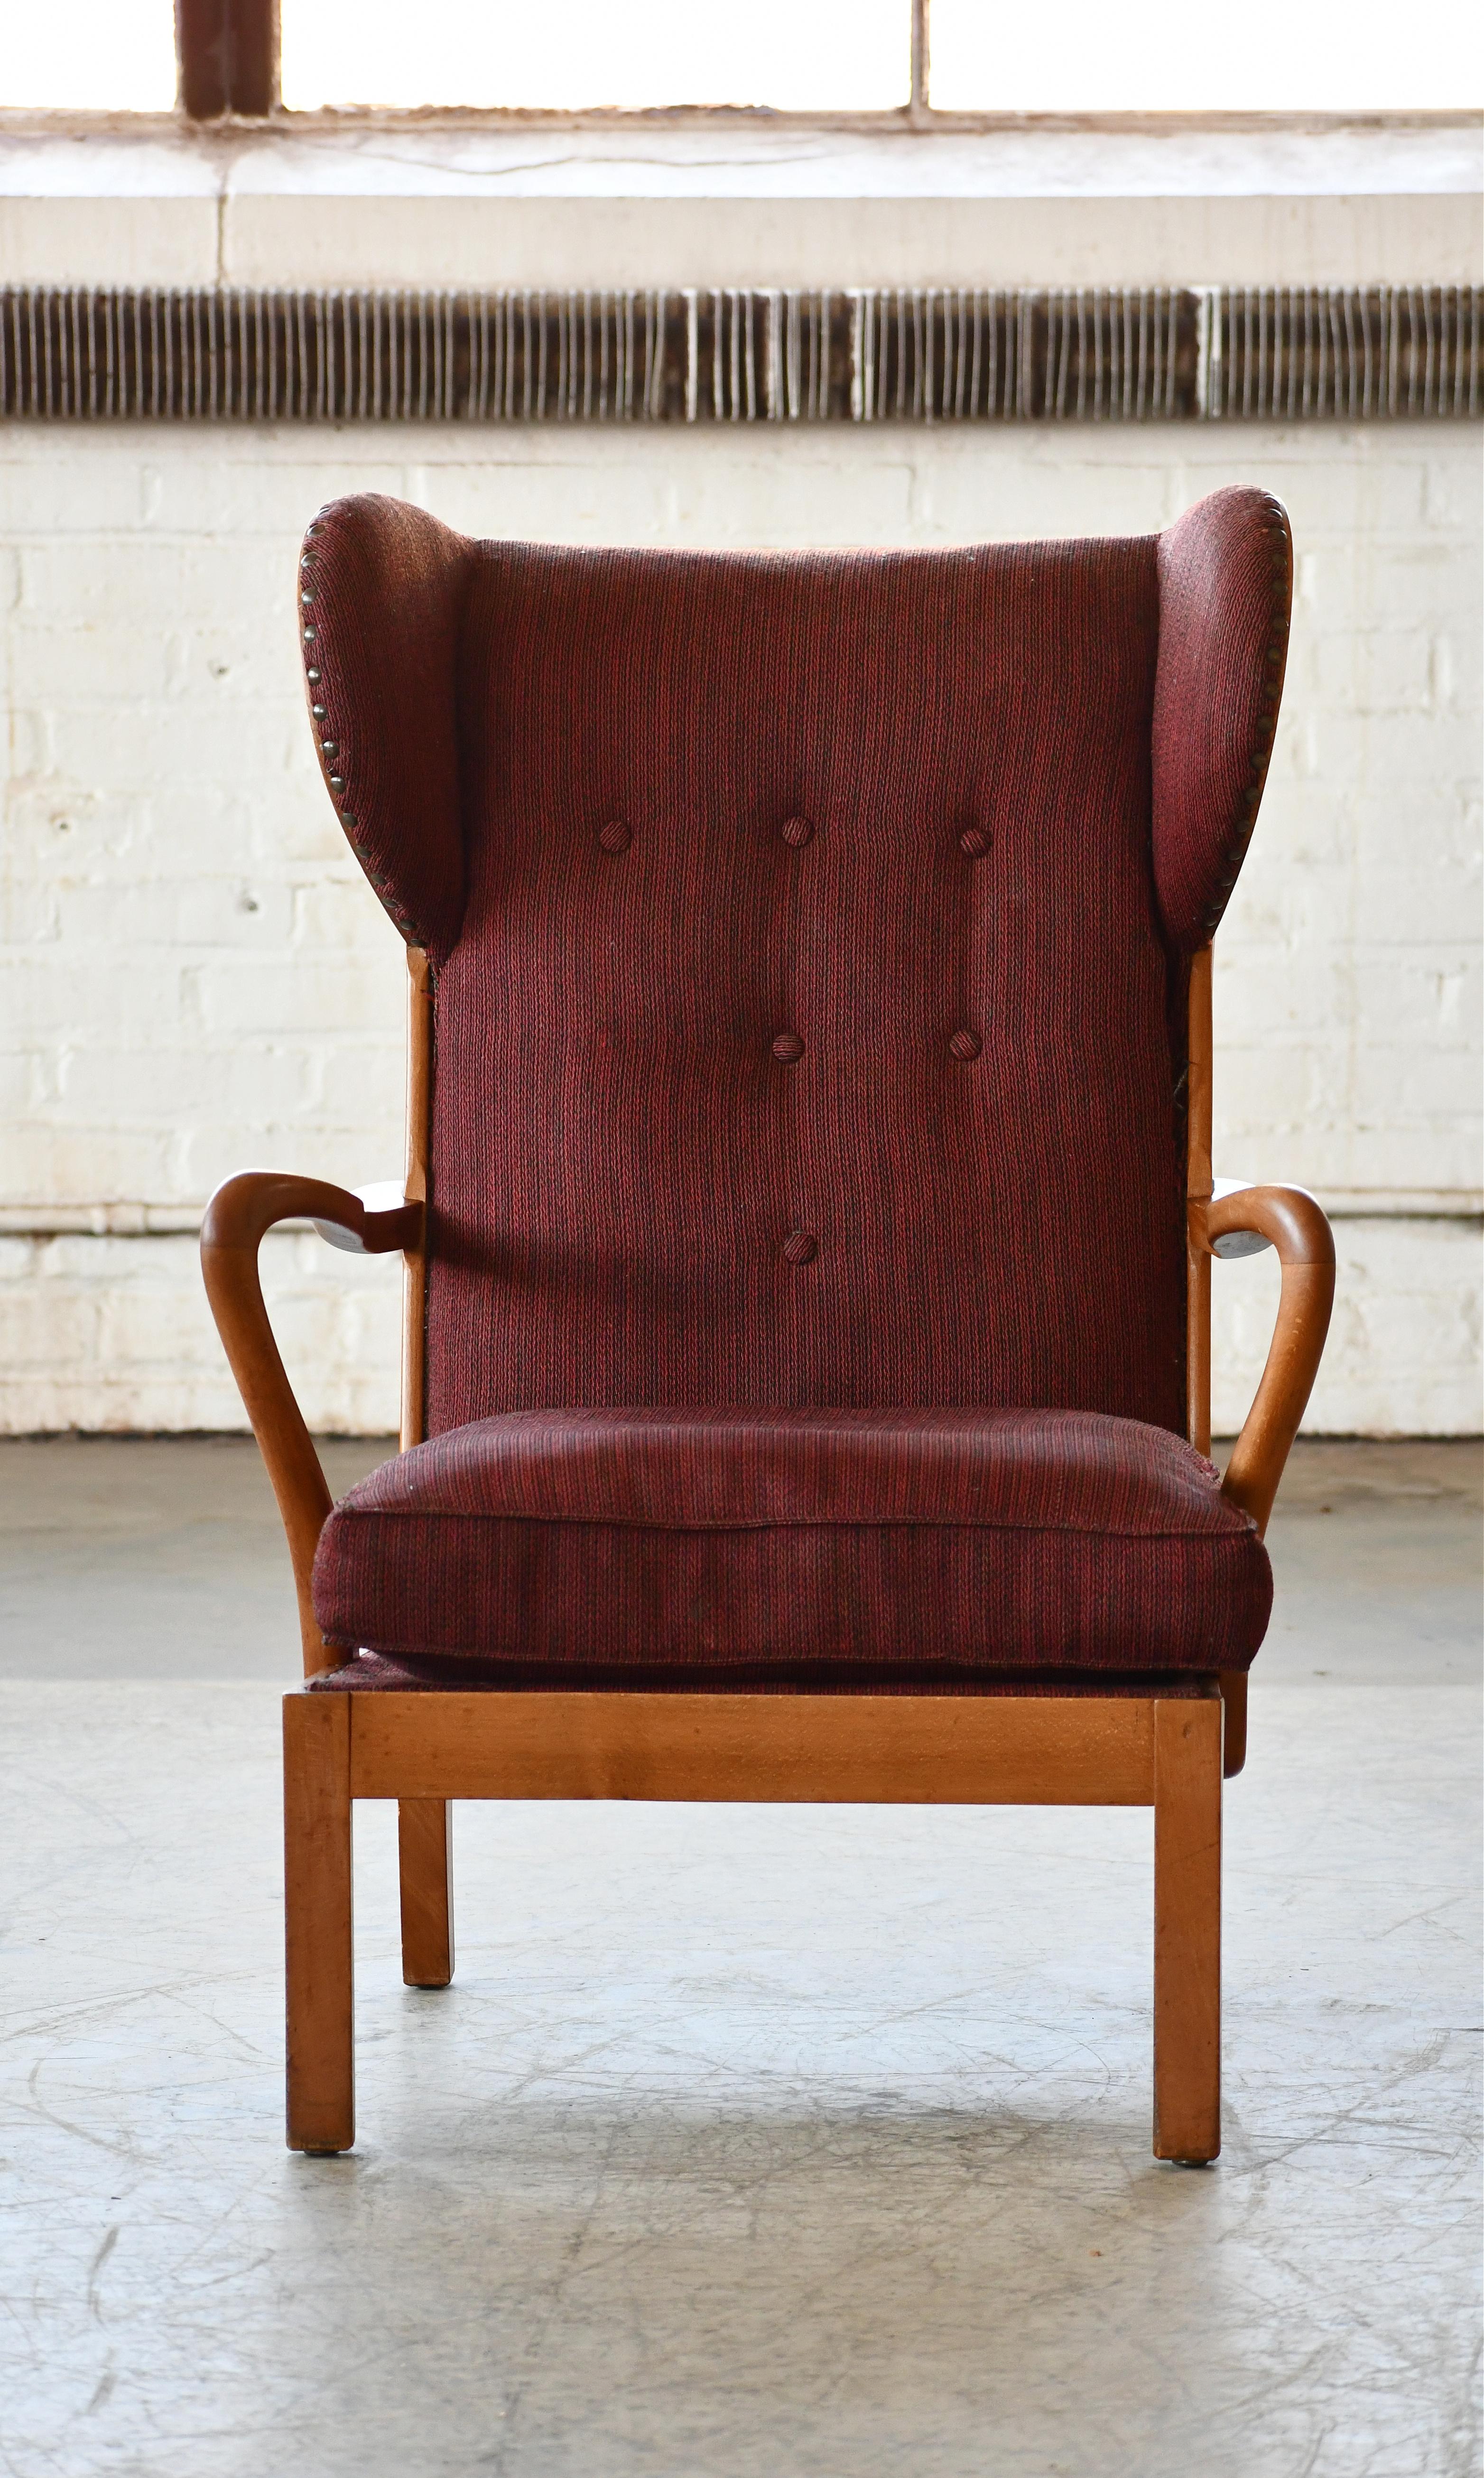 Danish Modern 1950s Highback Lounge Wing Chair With Wooden Wings In Good Condition For Sale In Bridgeport, CT